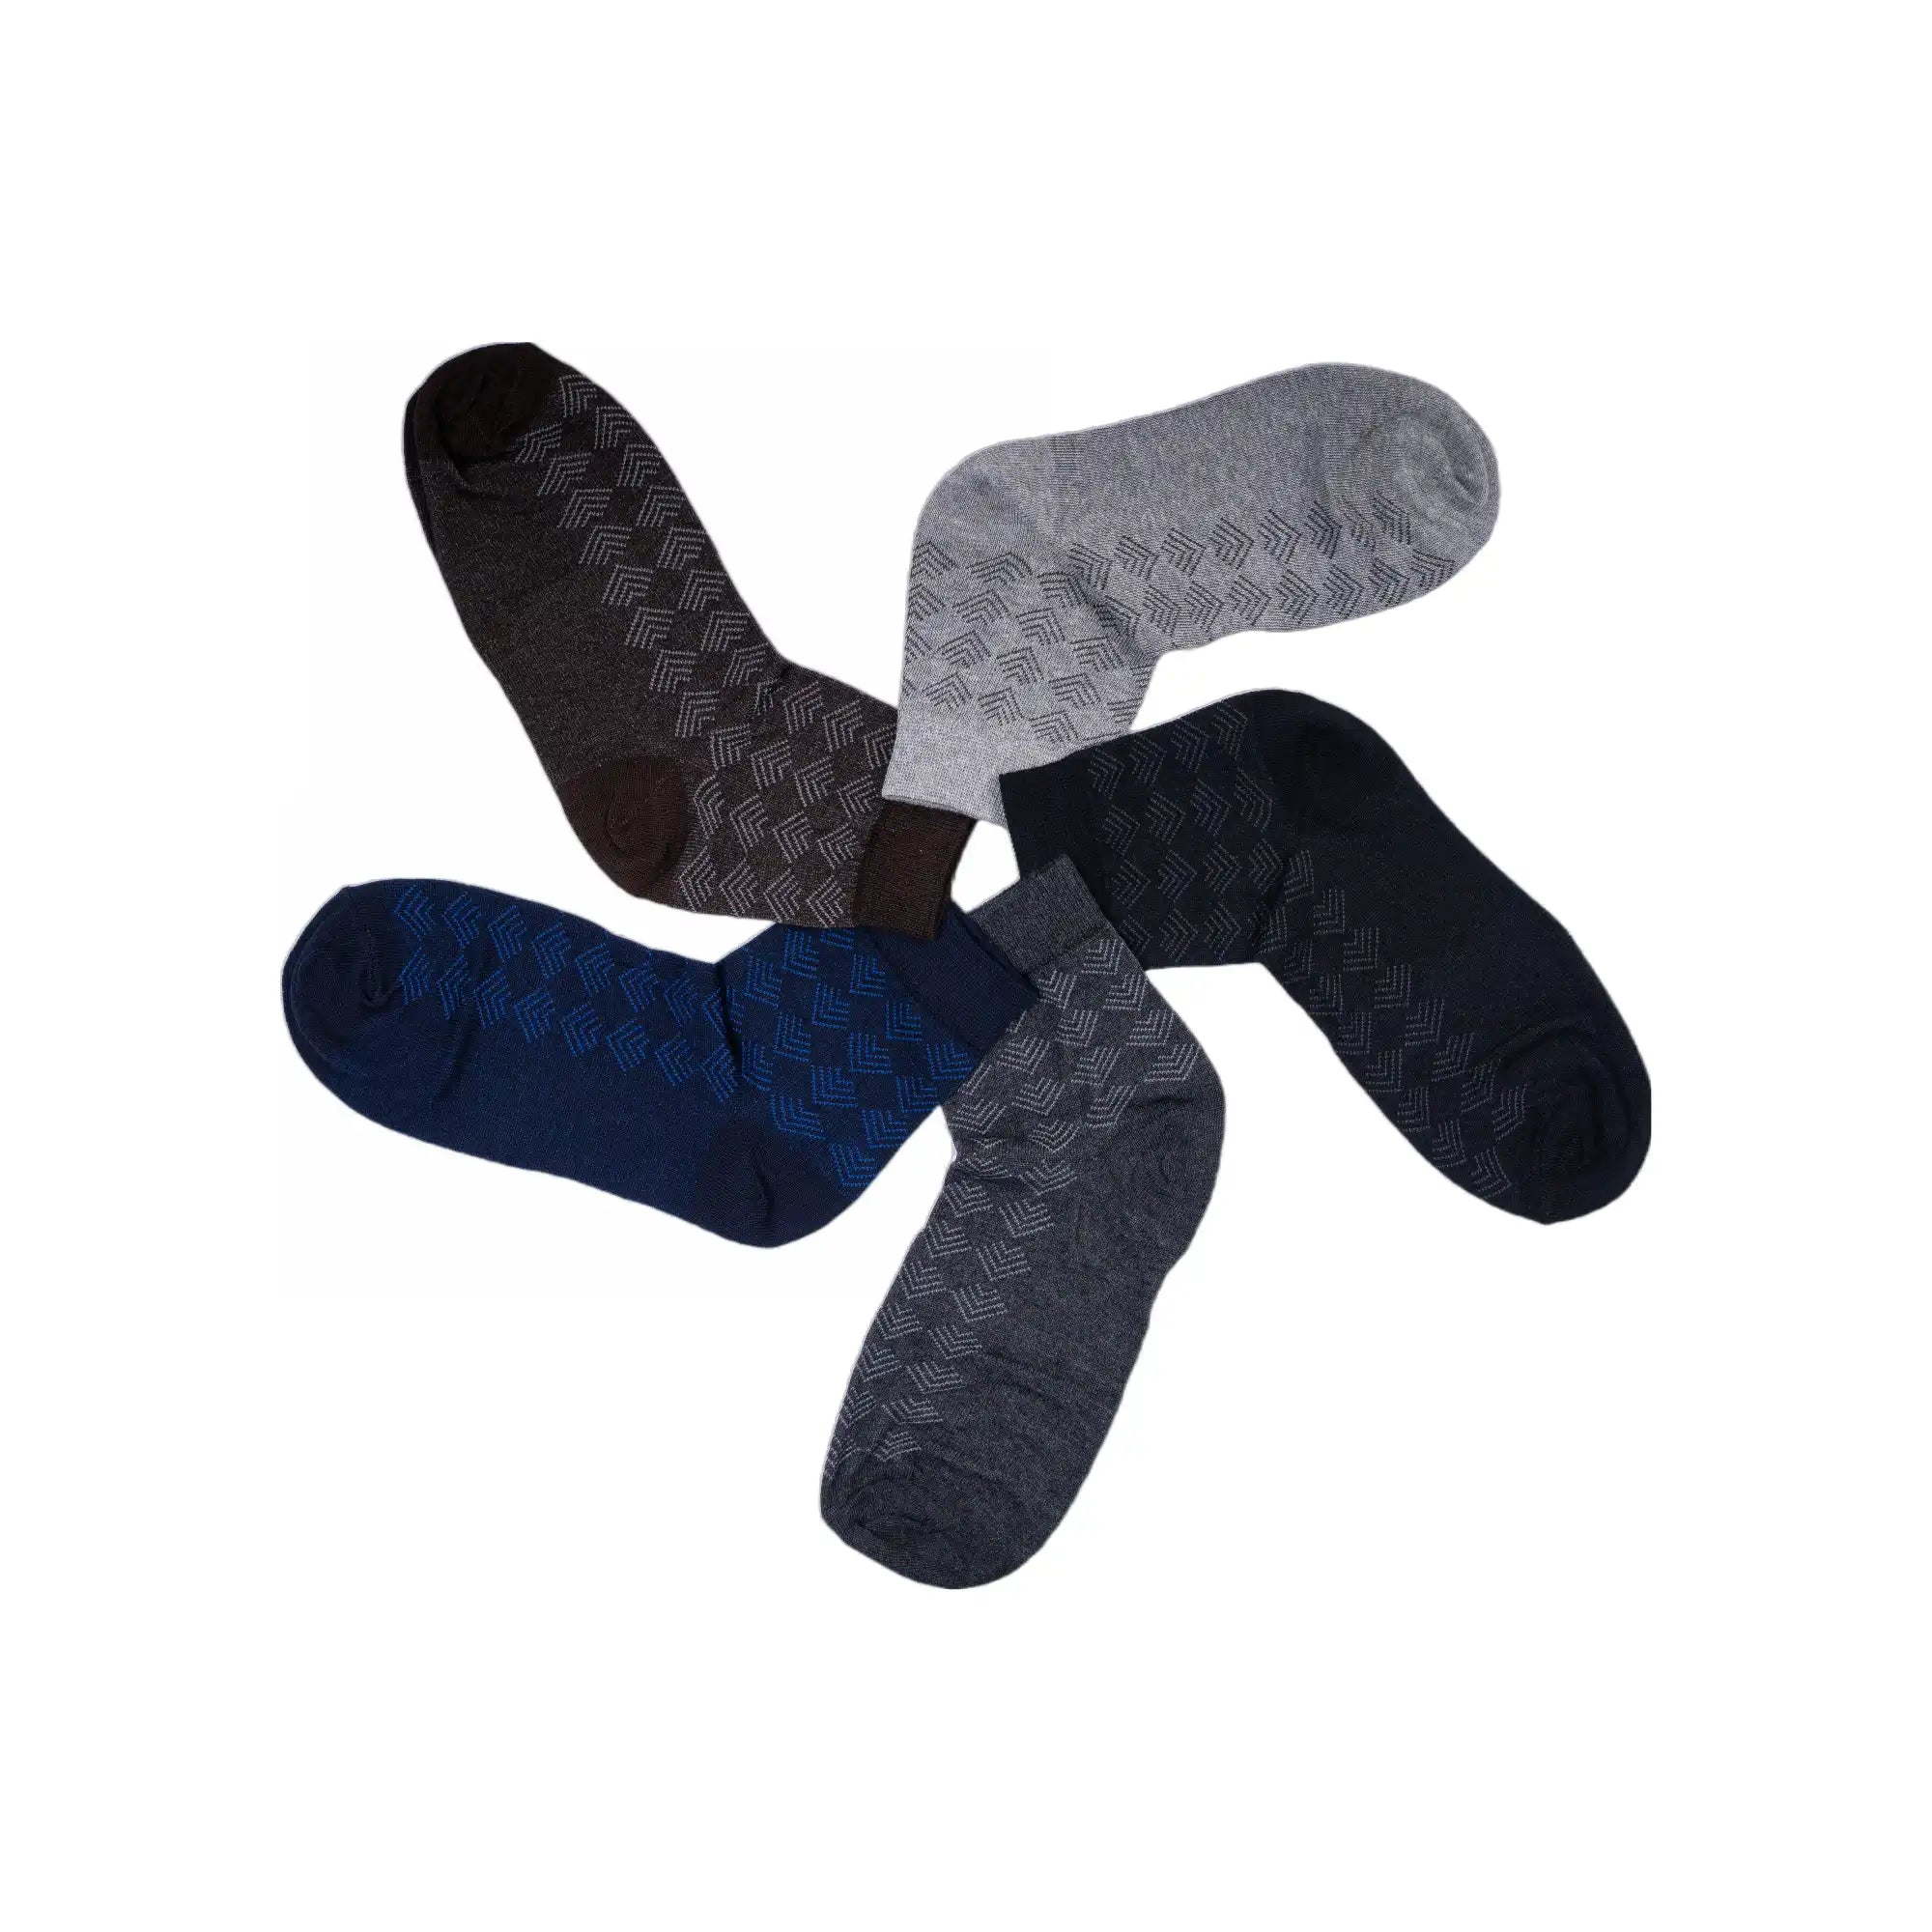 Young Wings Men's Multi Colour Cotton Fabric Solid Ankle Length Socks - Pack of 5, Style no. 2303-M1